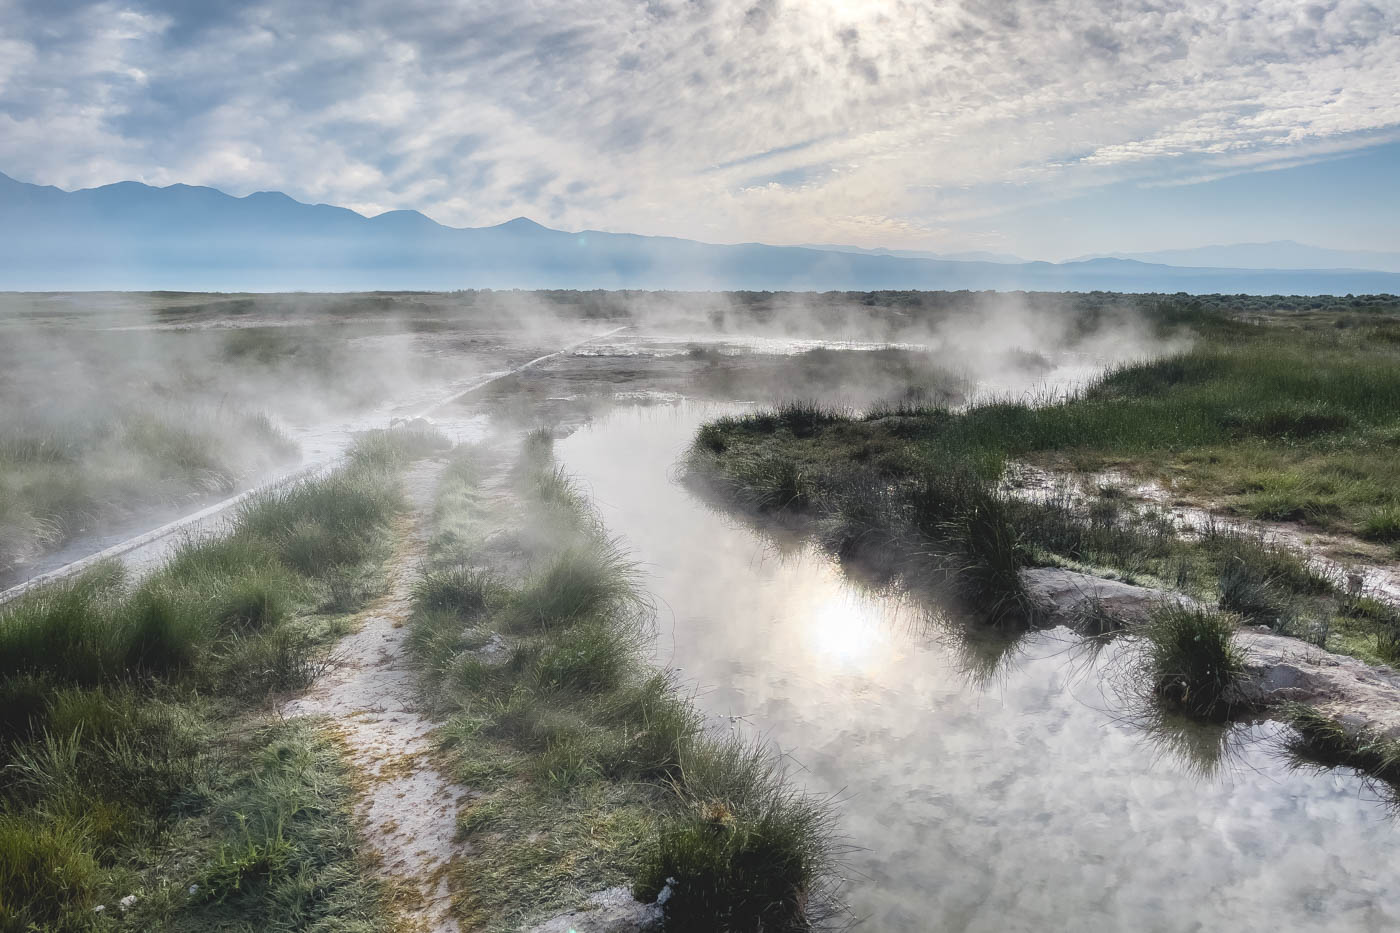 A beautiful scene of steam rising over a stream in a geothermal activity in the area.